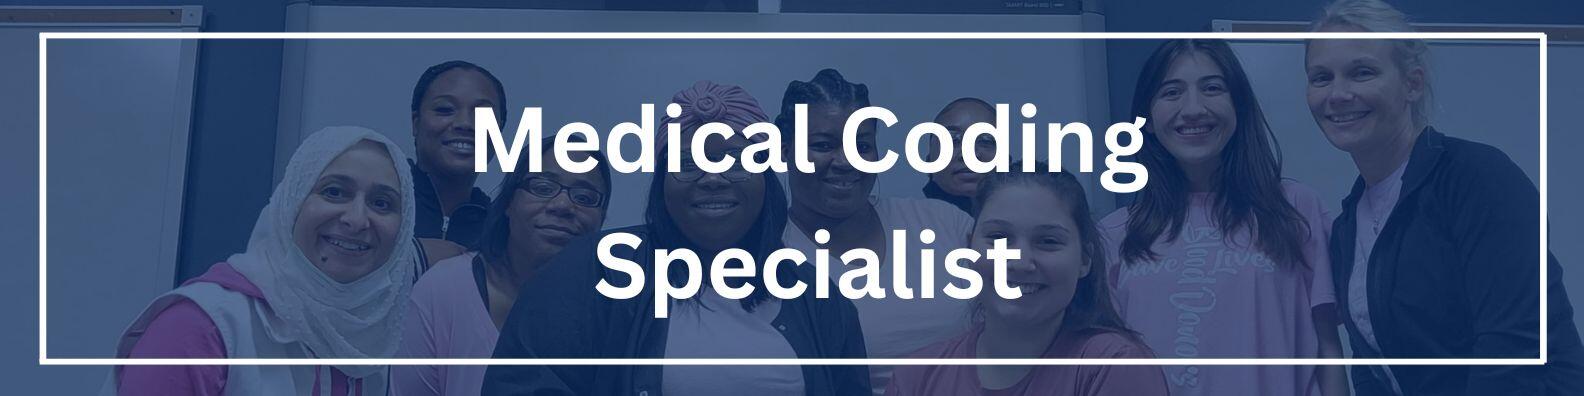 Medical Coding Specialist Graphic